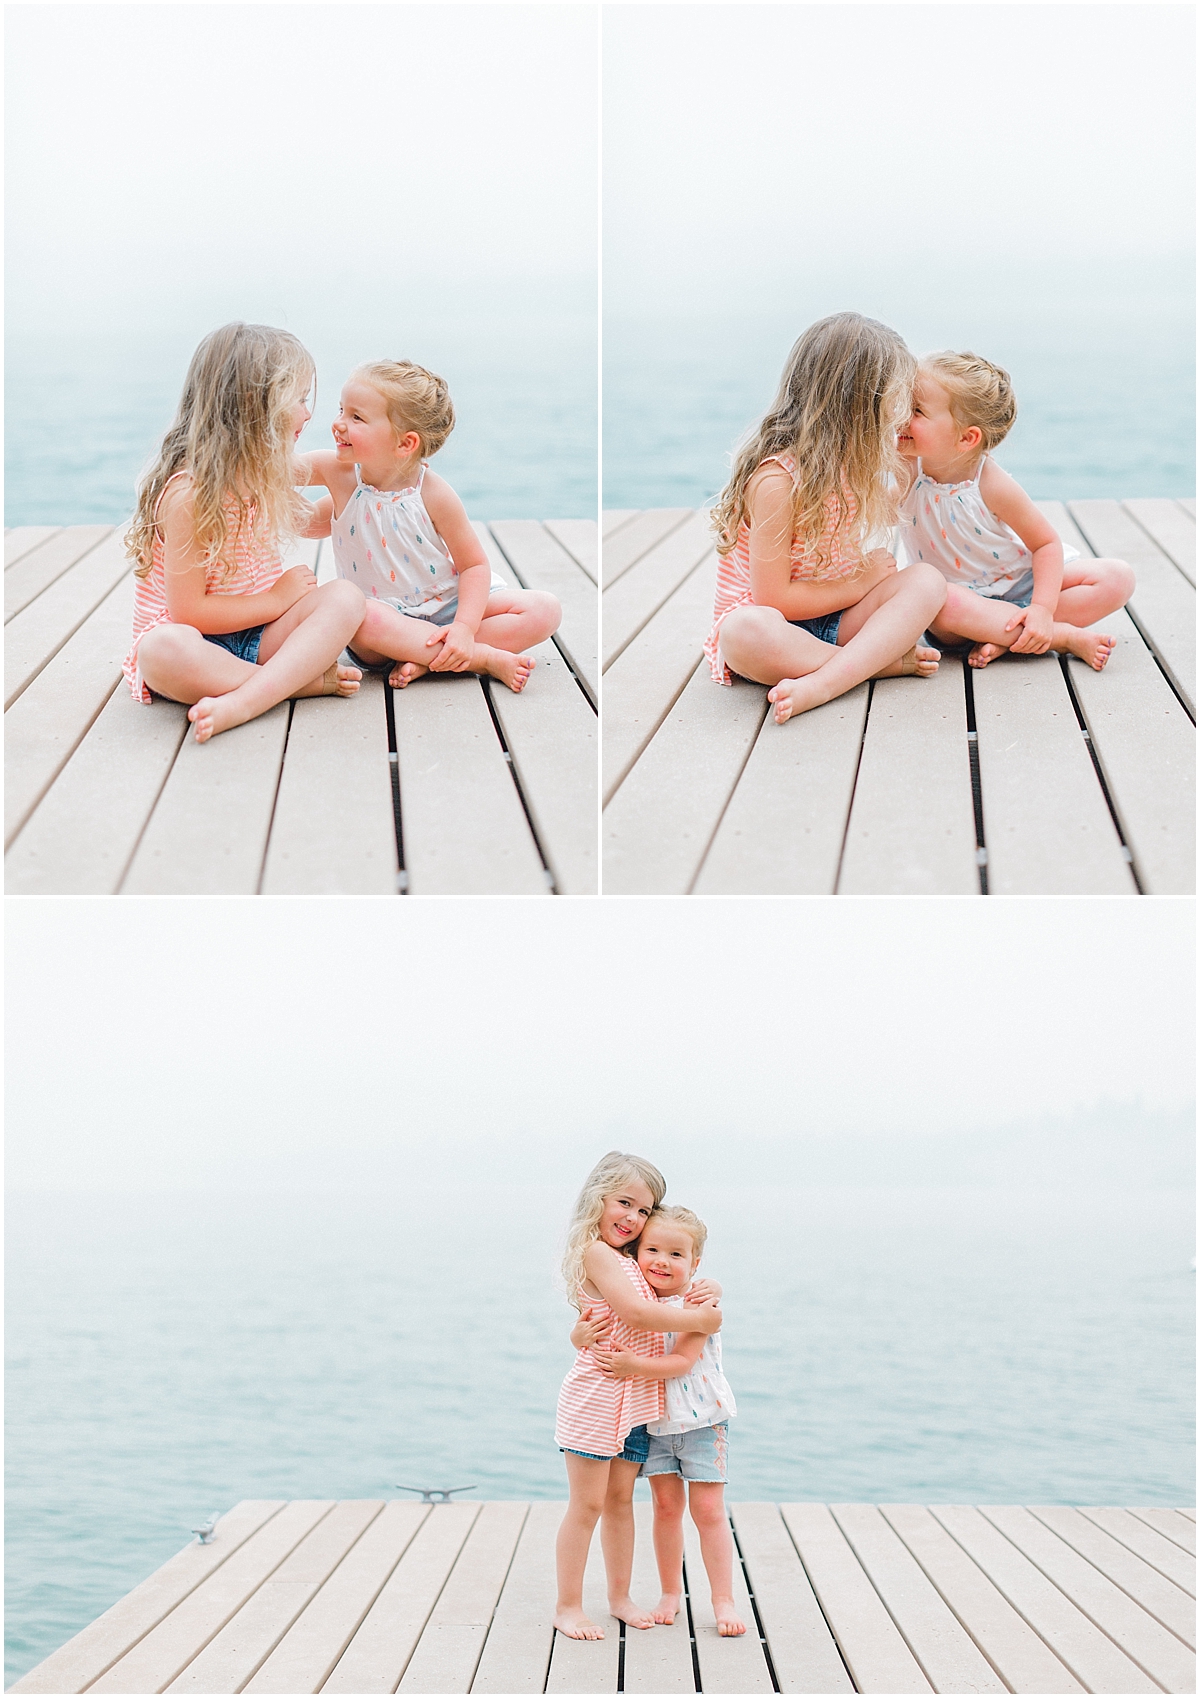 Emma Rose Company | PNW Family Portrait Photographer | Light and Airy Photography Style | What to Wear to Family Pictures | Kindred Presets | Lake Chelan Wedding Portrait Photographer_0111.jpg